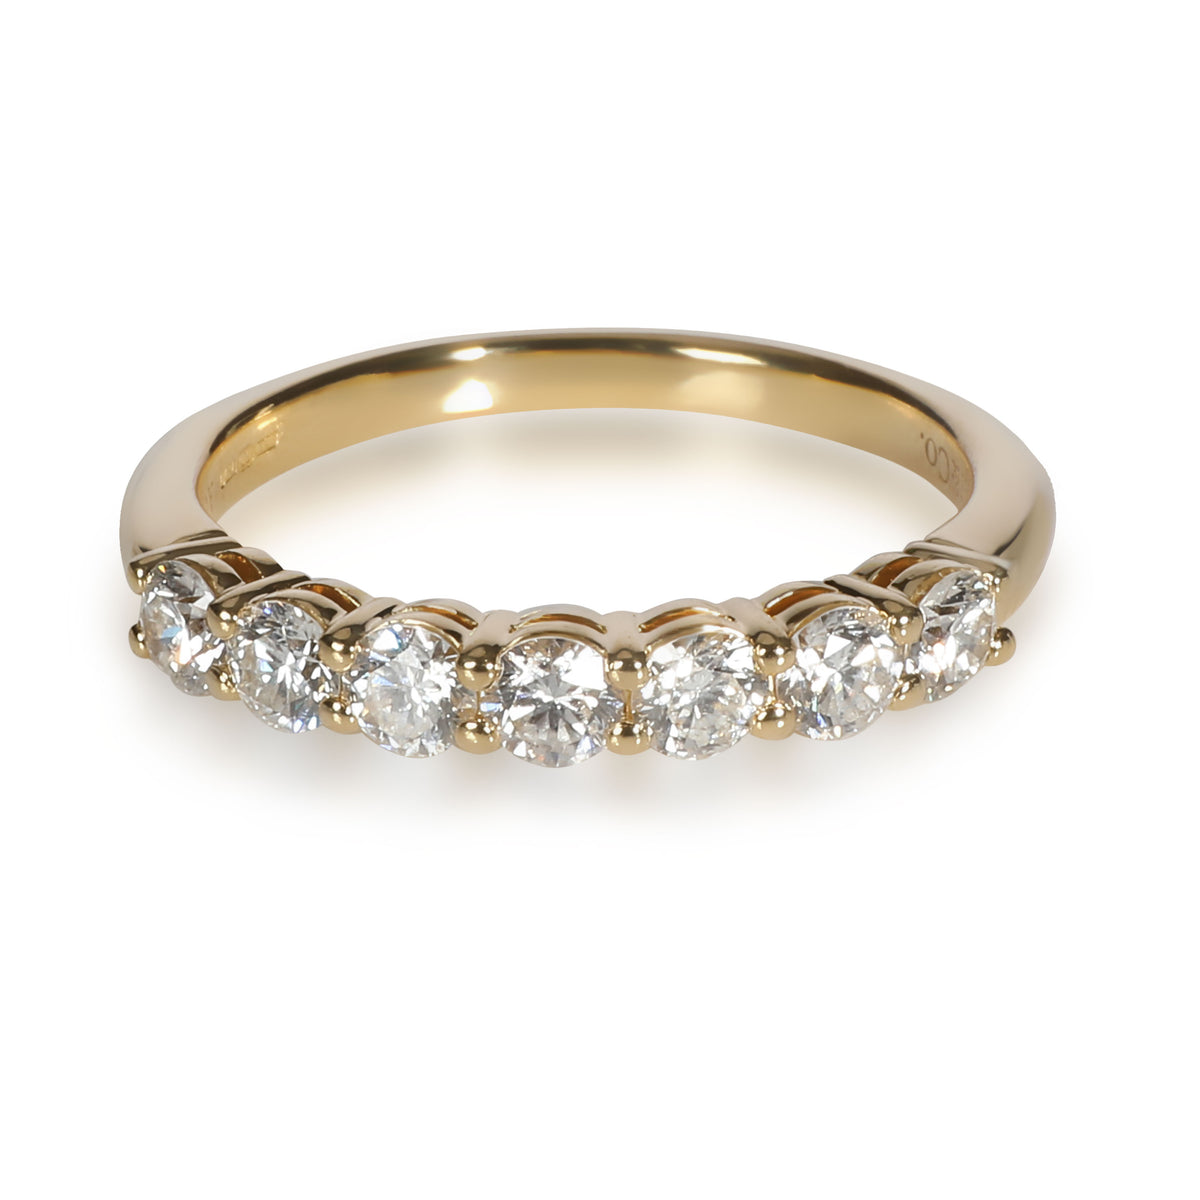 Tiffany & Co. Embrace Diamond Ring in 18K Yellow Gold 0.67 CTW